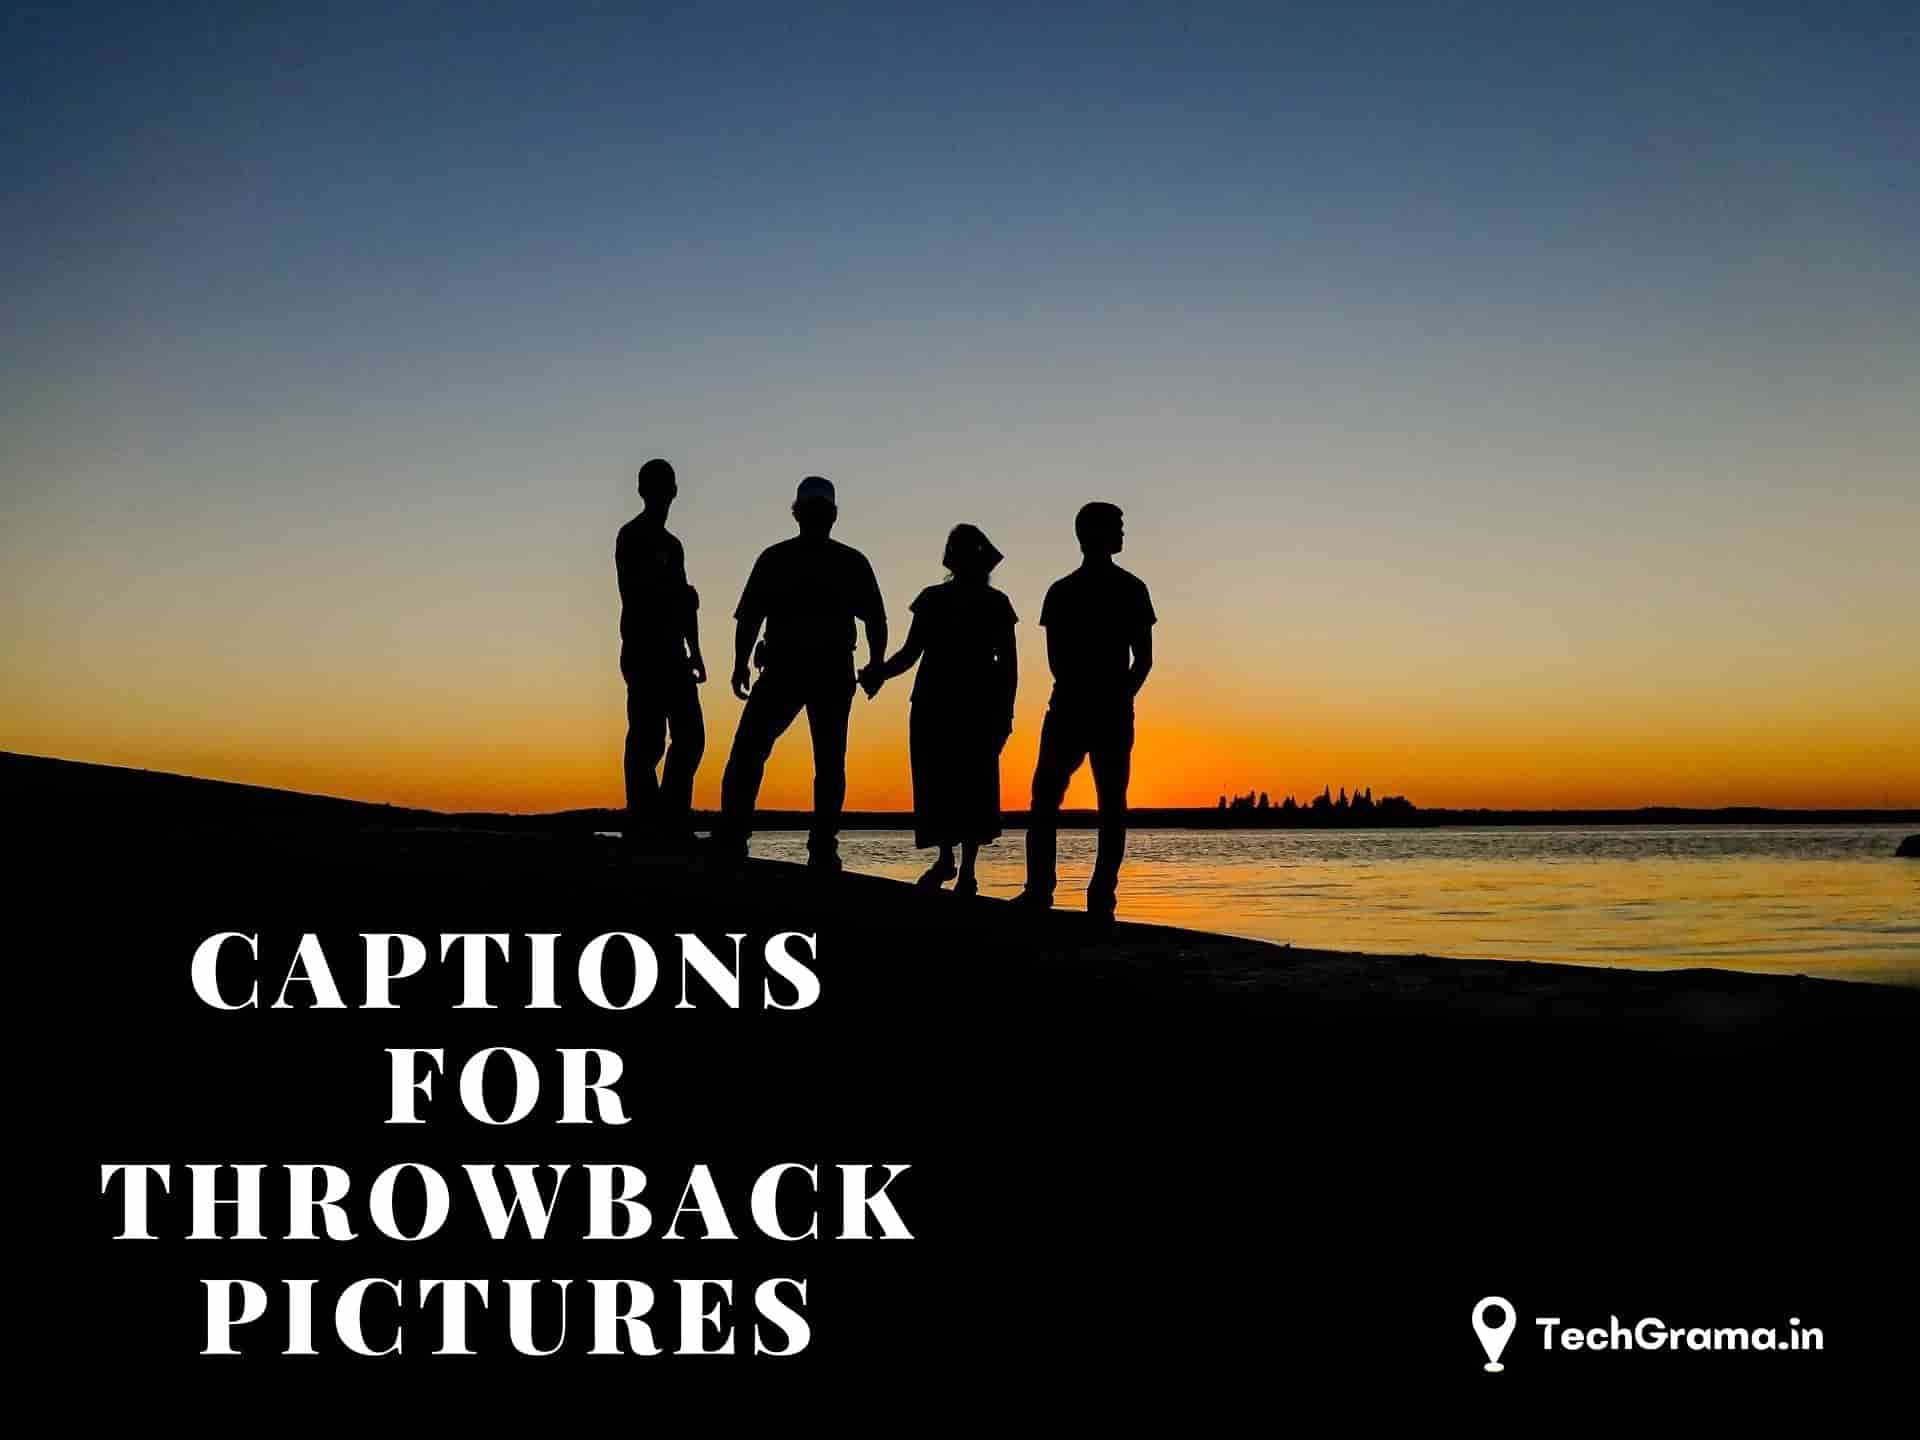 Best Throwback Captions For Instagram, Throwback Picture Captions, Throwback Thursday Captions, Throwback Selfie Captions, Throwback Captions For Travel, Throwback Captions For Myself, Throwback Instagram Captions, Captions About Throwback, Throwback To Vacation Captions, Throwback Captions With Friends, Throwback Childhood Picture Captions, Throwback Photo Captions For Instagram.